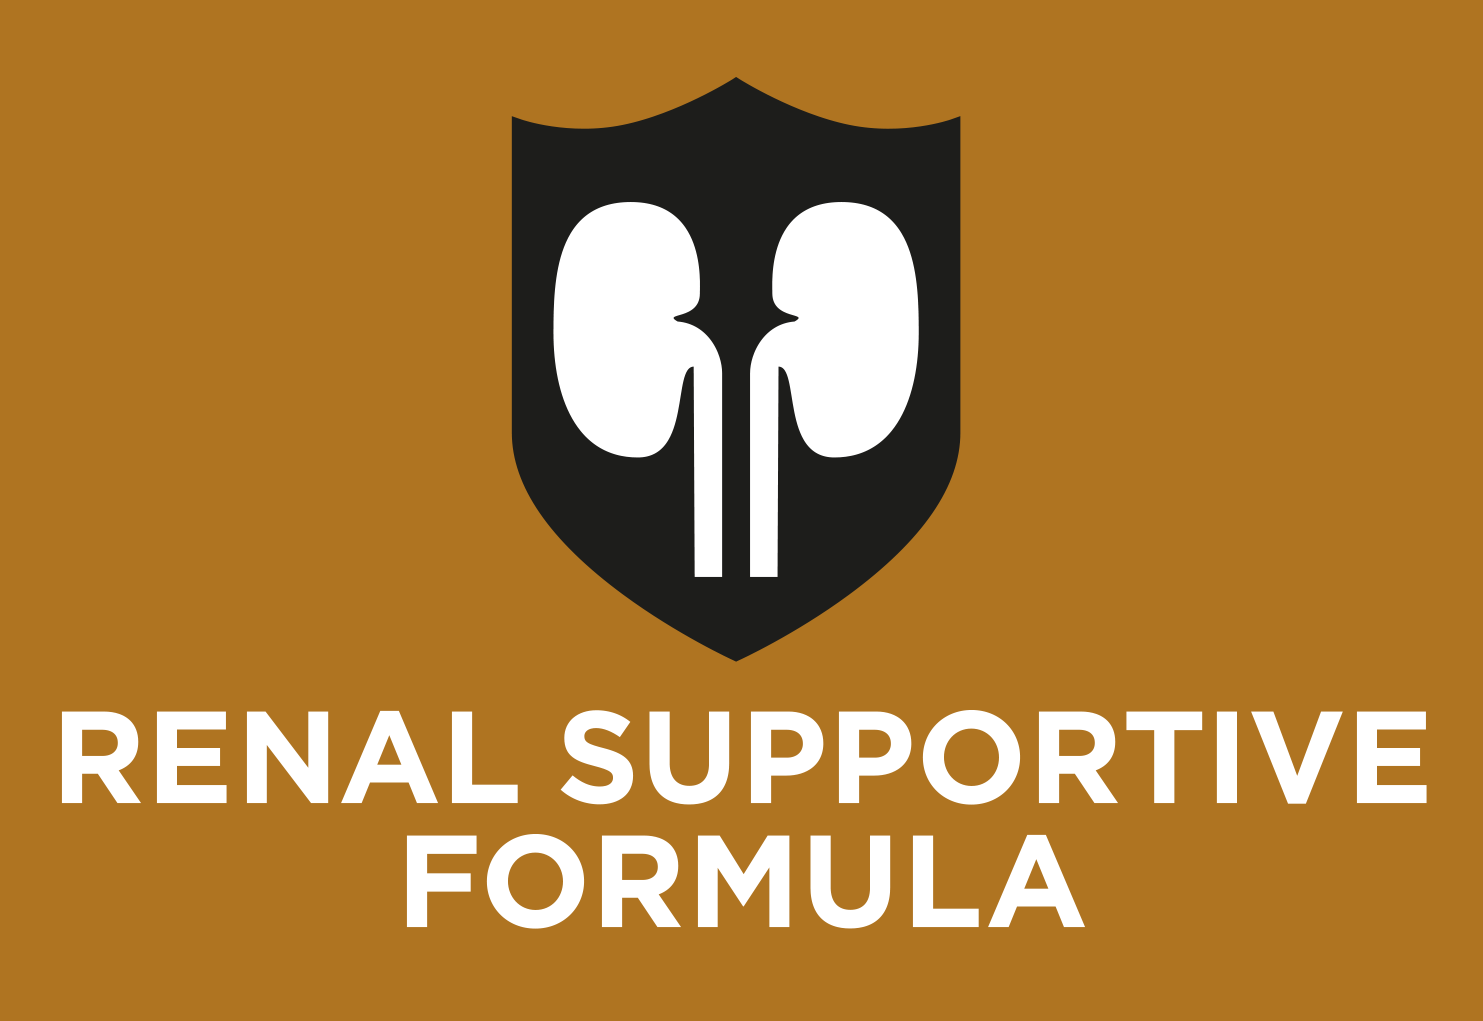 Renal Supportive Formula